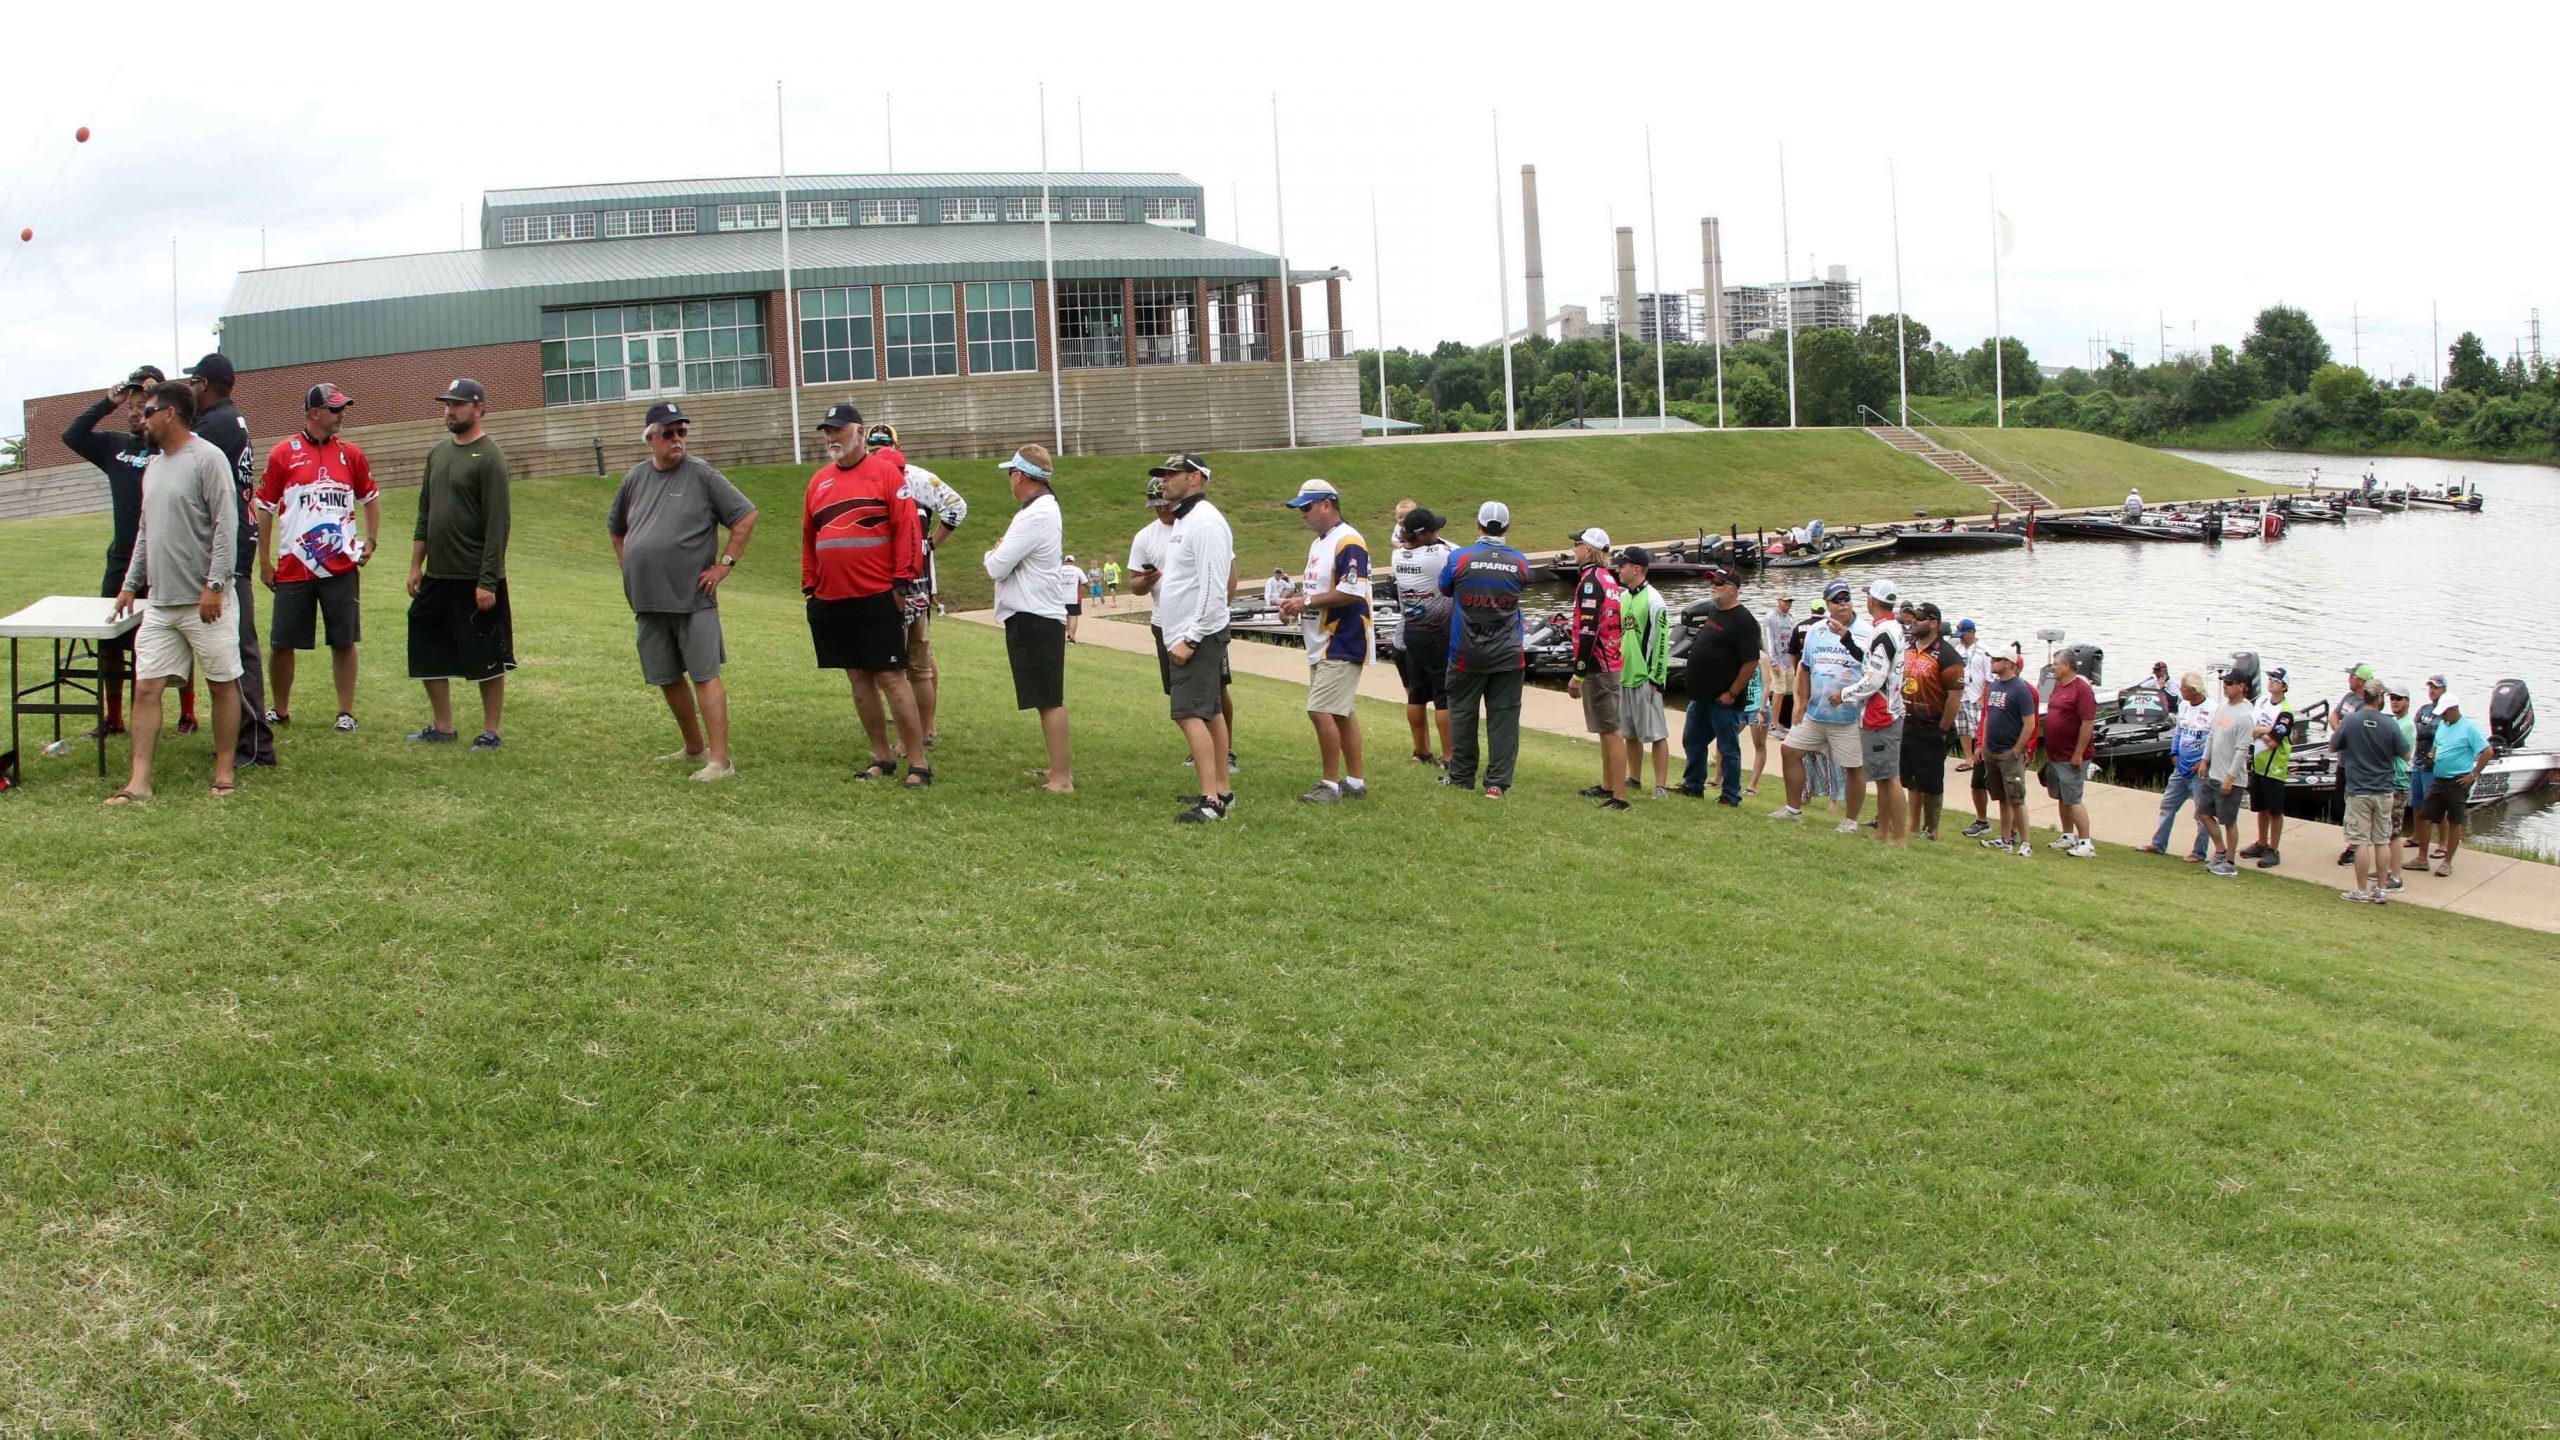 With 194 boats in the tournament field, the line waiting for weigh-in bags stretched up the hill at Three Forks Harbor.